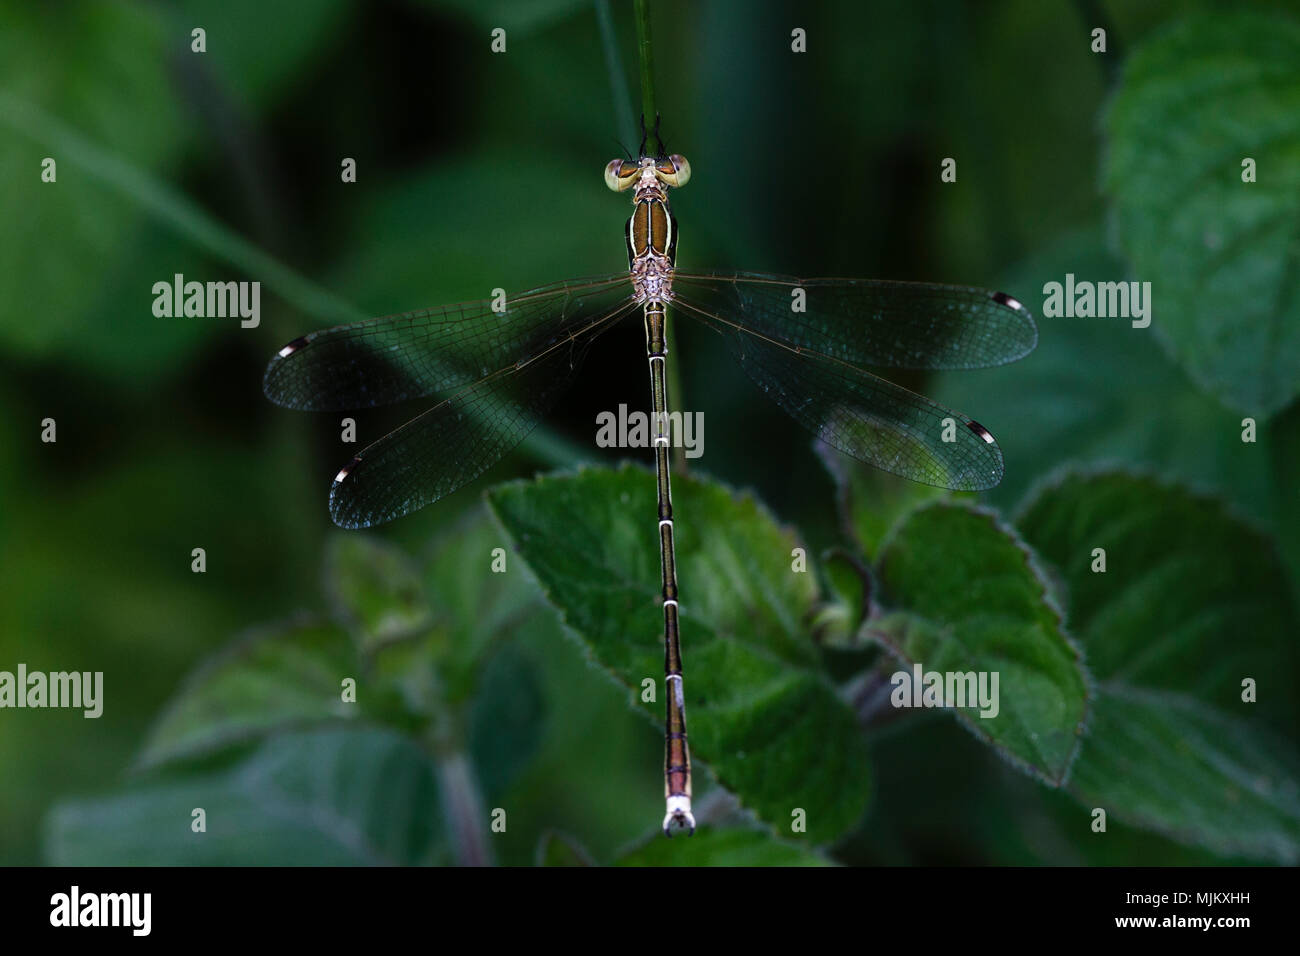 Southern emerald damsel fly perched on a grass stalk in the Danube Delta in Romania Stock Photo